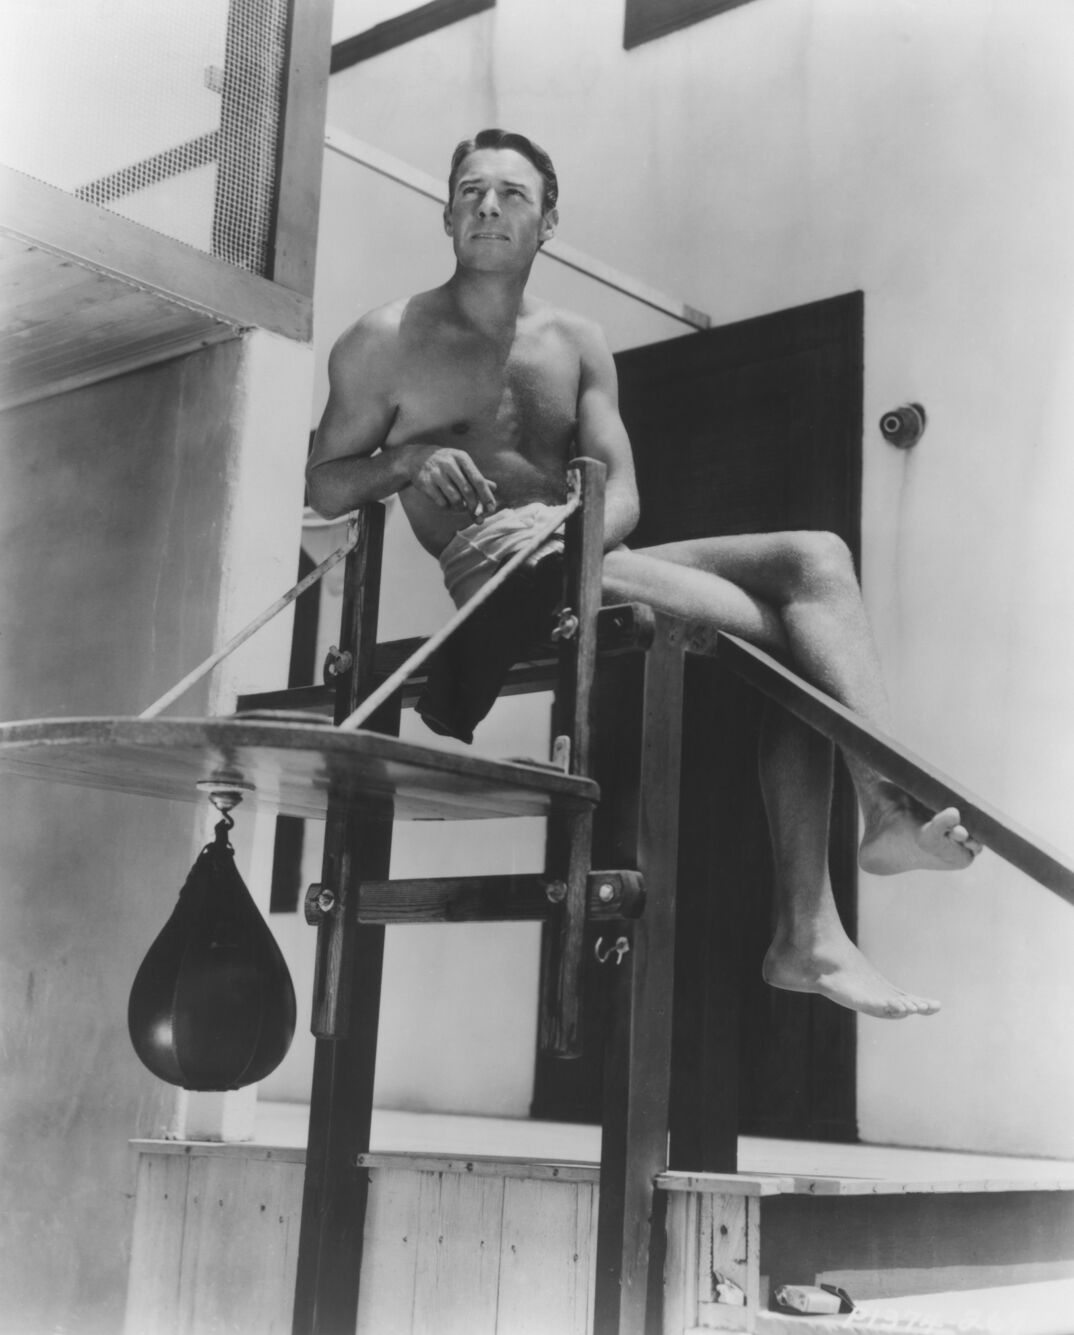 Randolph Scott poses bare-chested on lifeguard tower circa 1940. (Photo by Screen Archives/Getty Images)